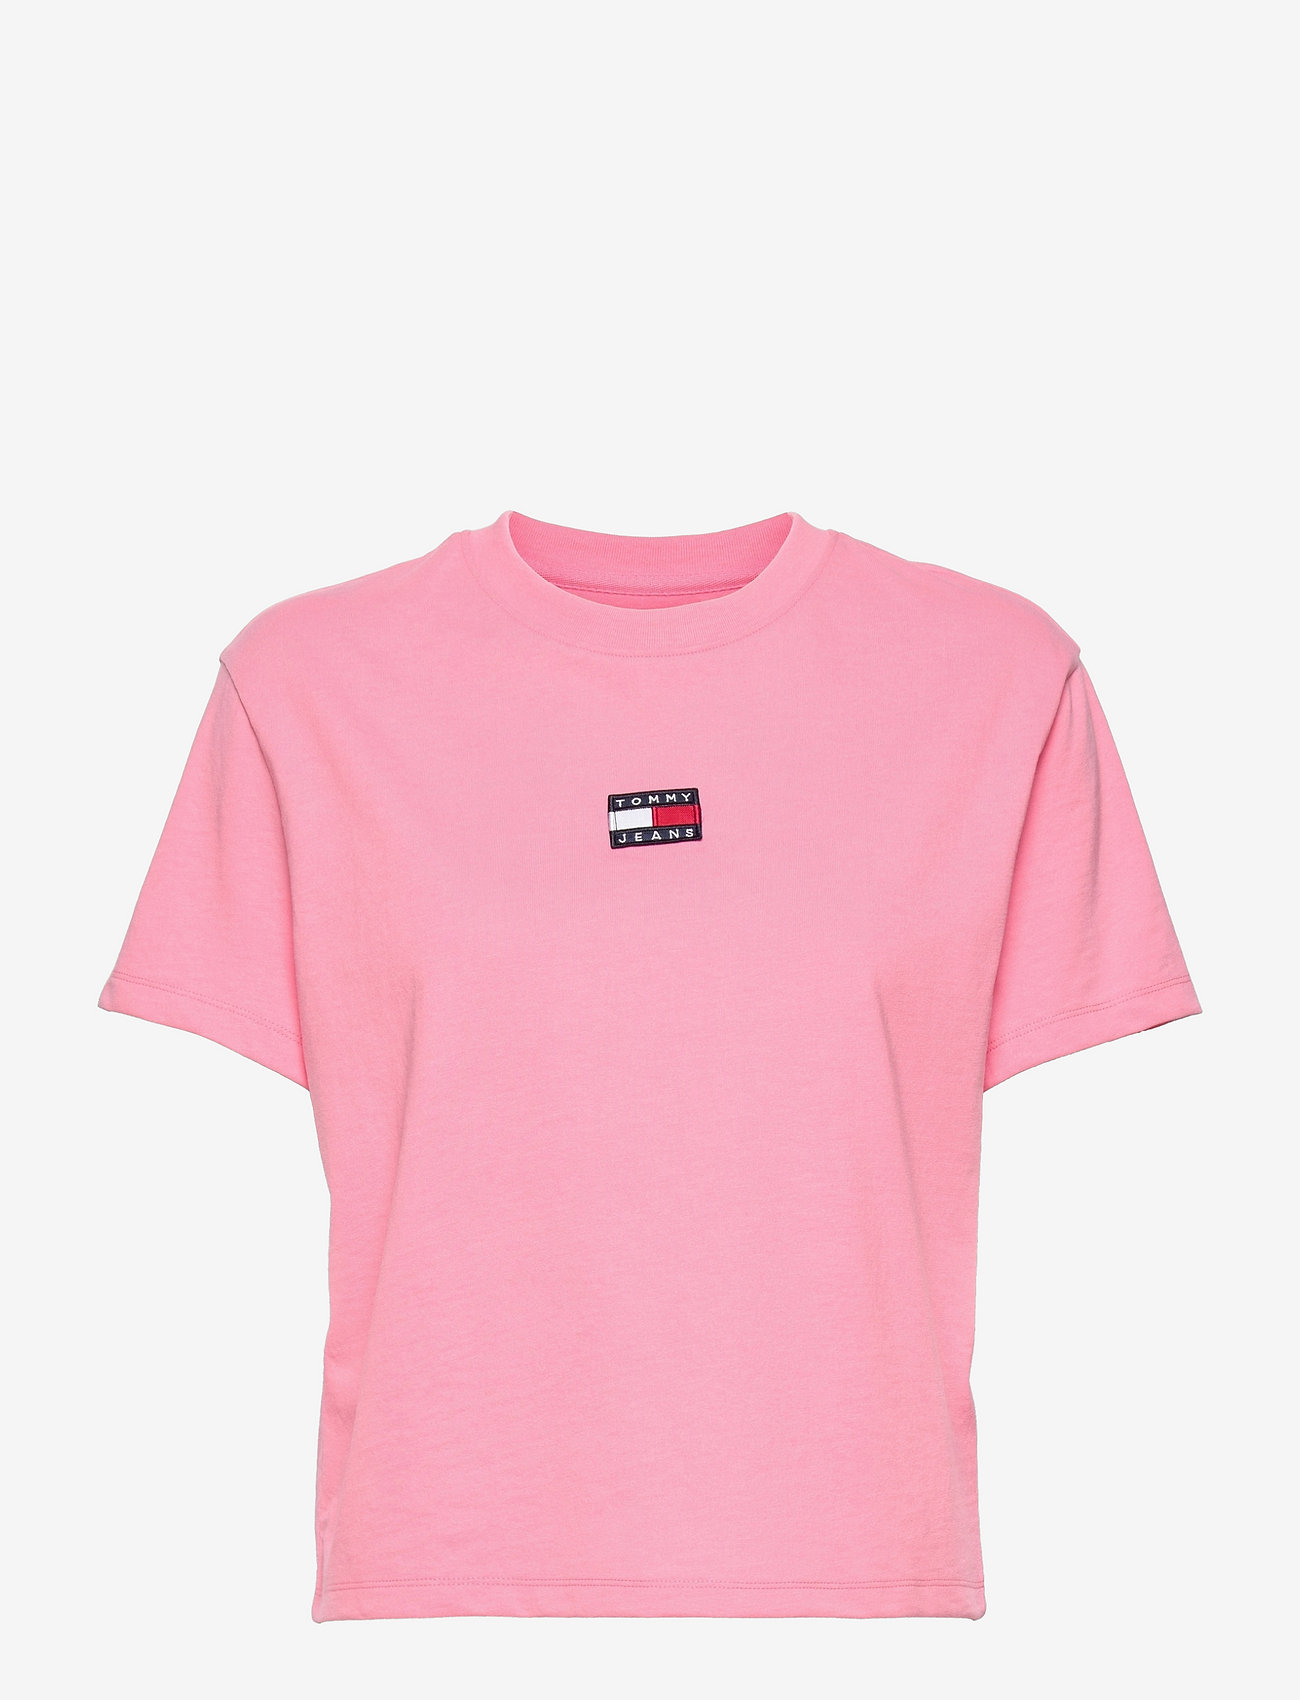 Tommy Jeans - TJW TOMMY CENTER BADGE TEE - t-shirts - fresh pink - 0